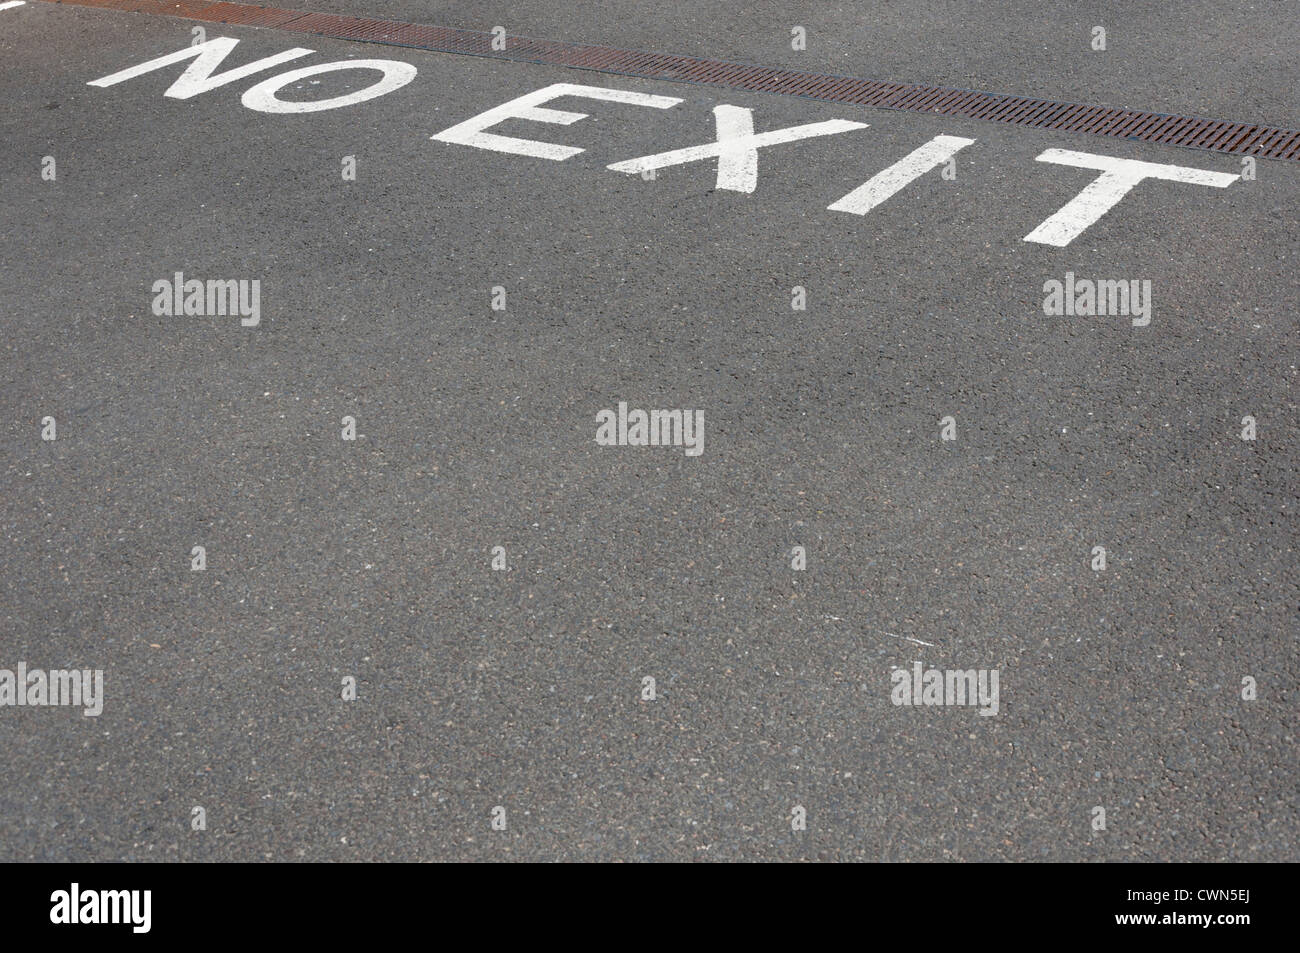 No Exit road markings Stock Photo